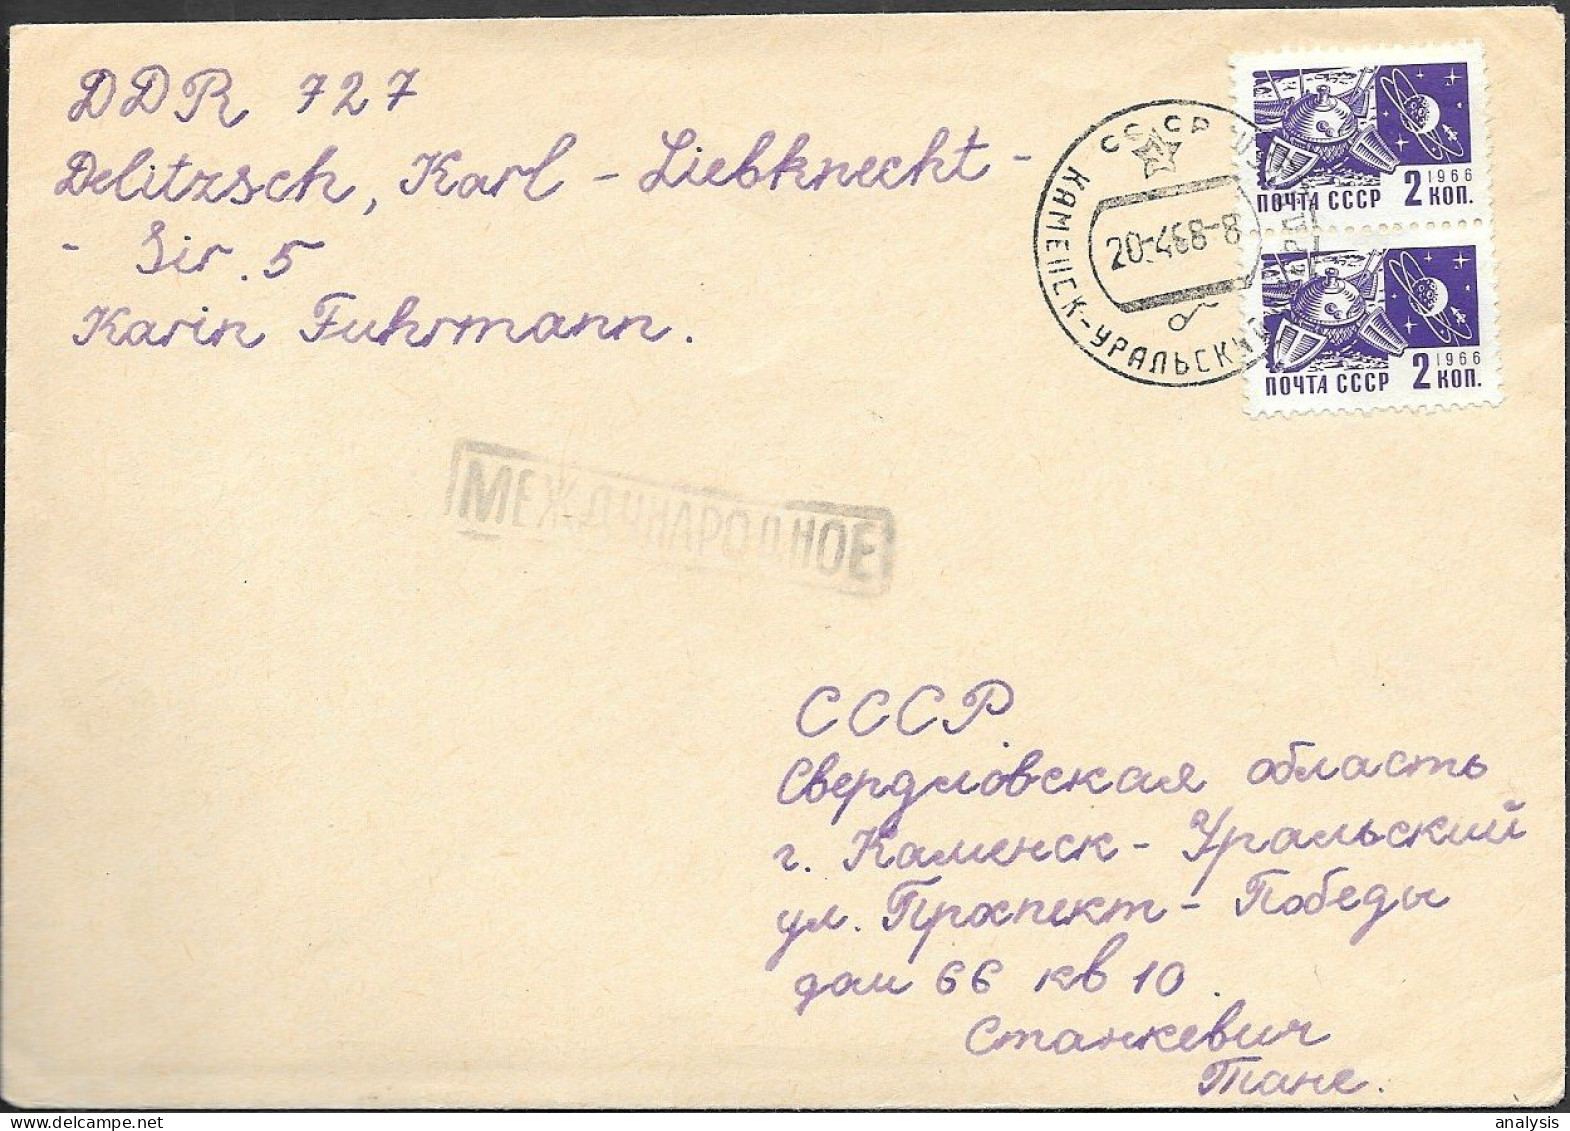 Russia Cover Mailed 1968 W/ Space Stamps Moon Probe "Luna 9" - UdSSR